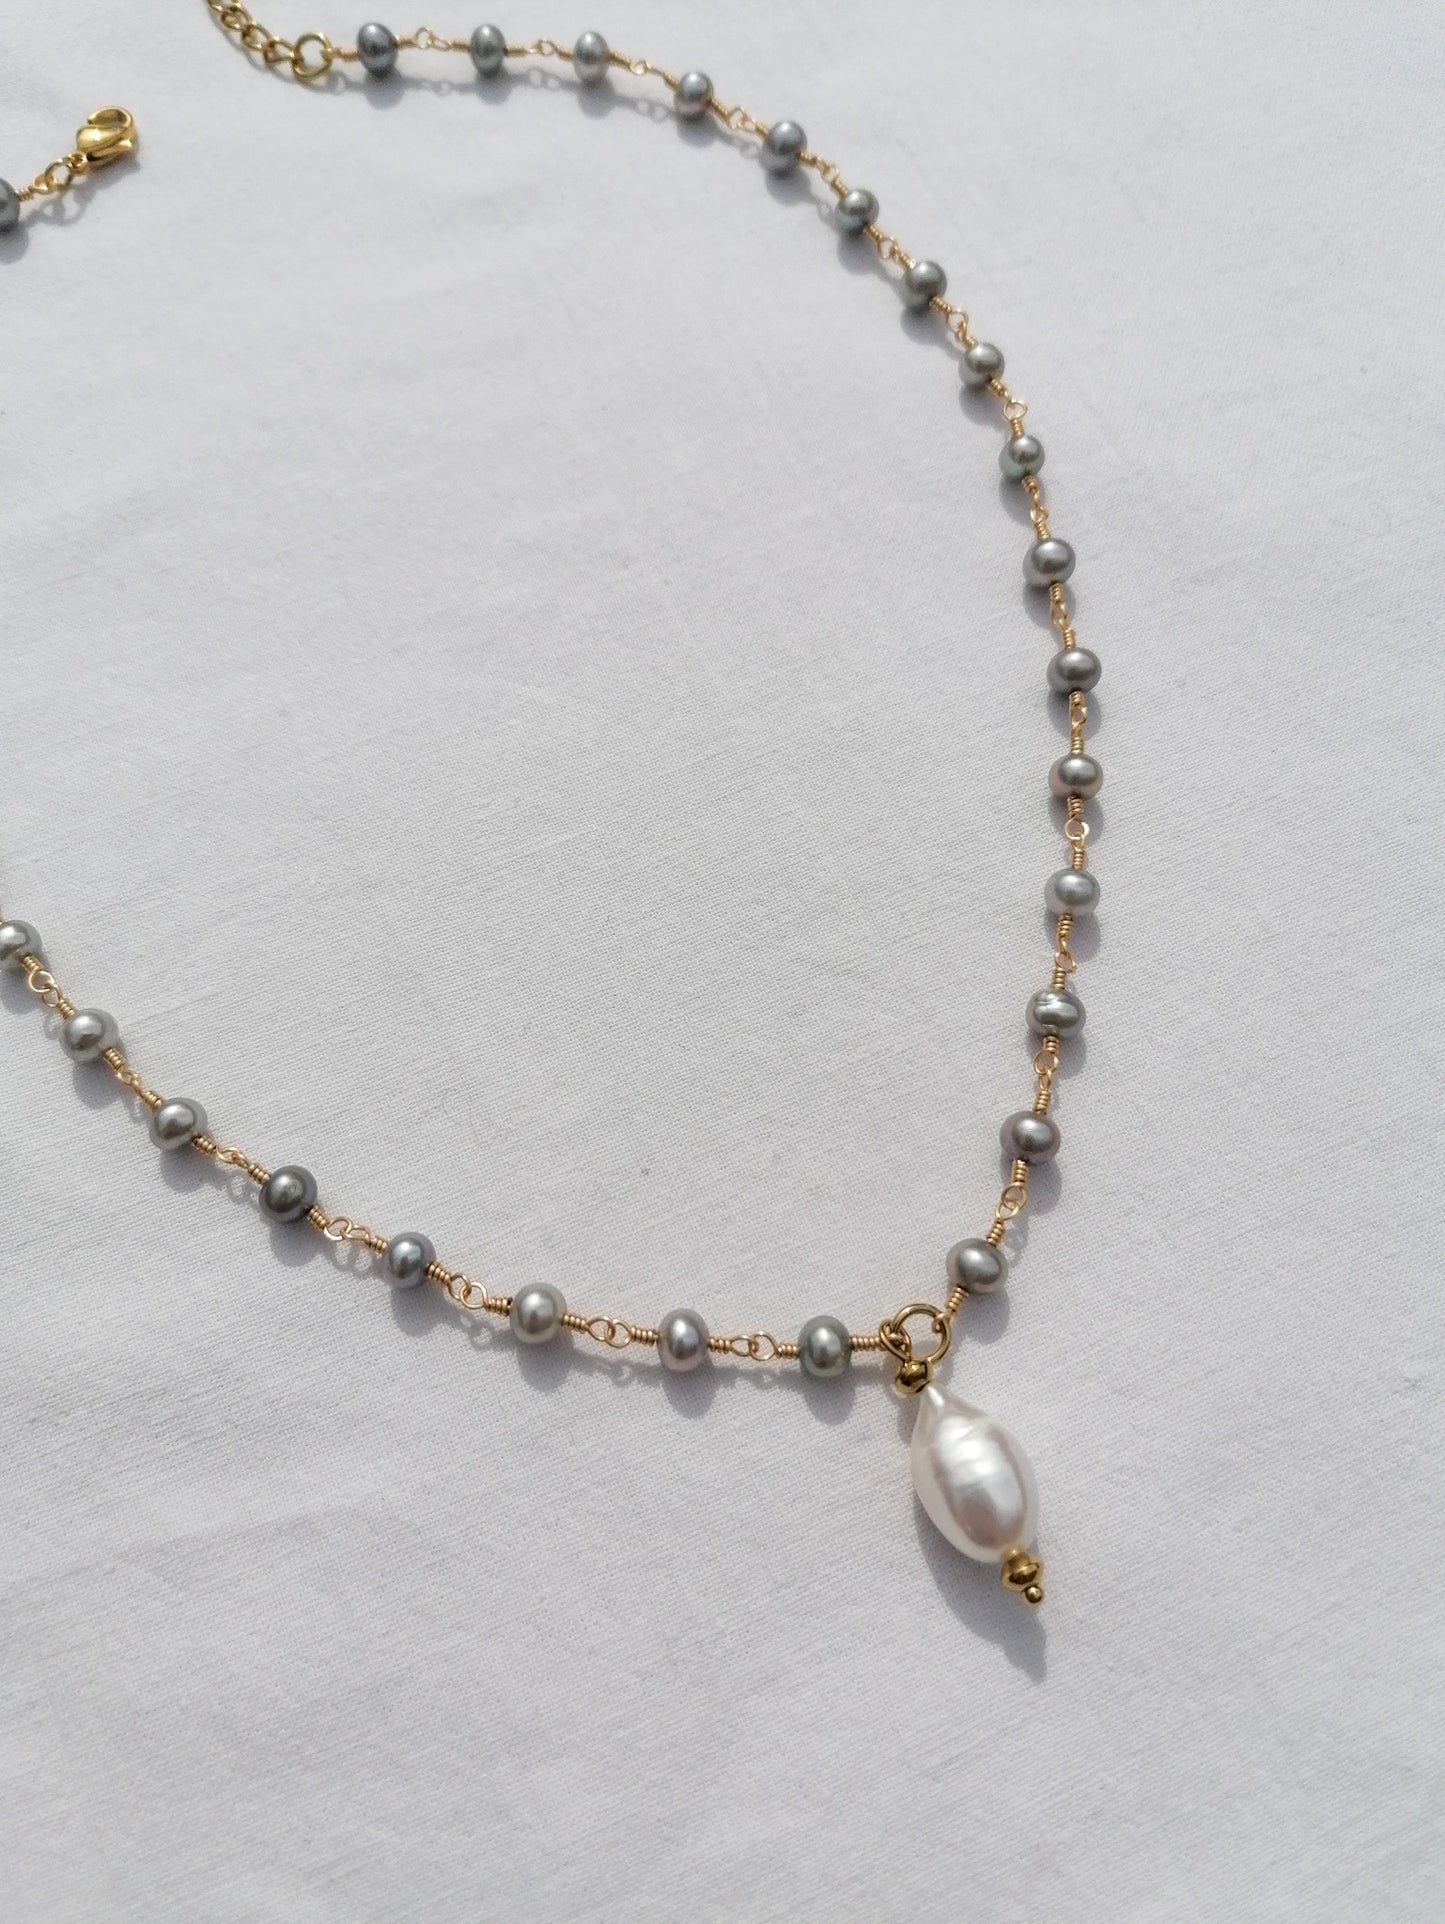 Gray pearl rosary necklace